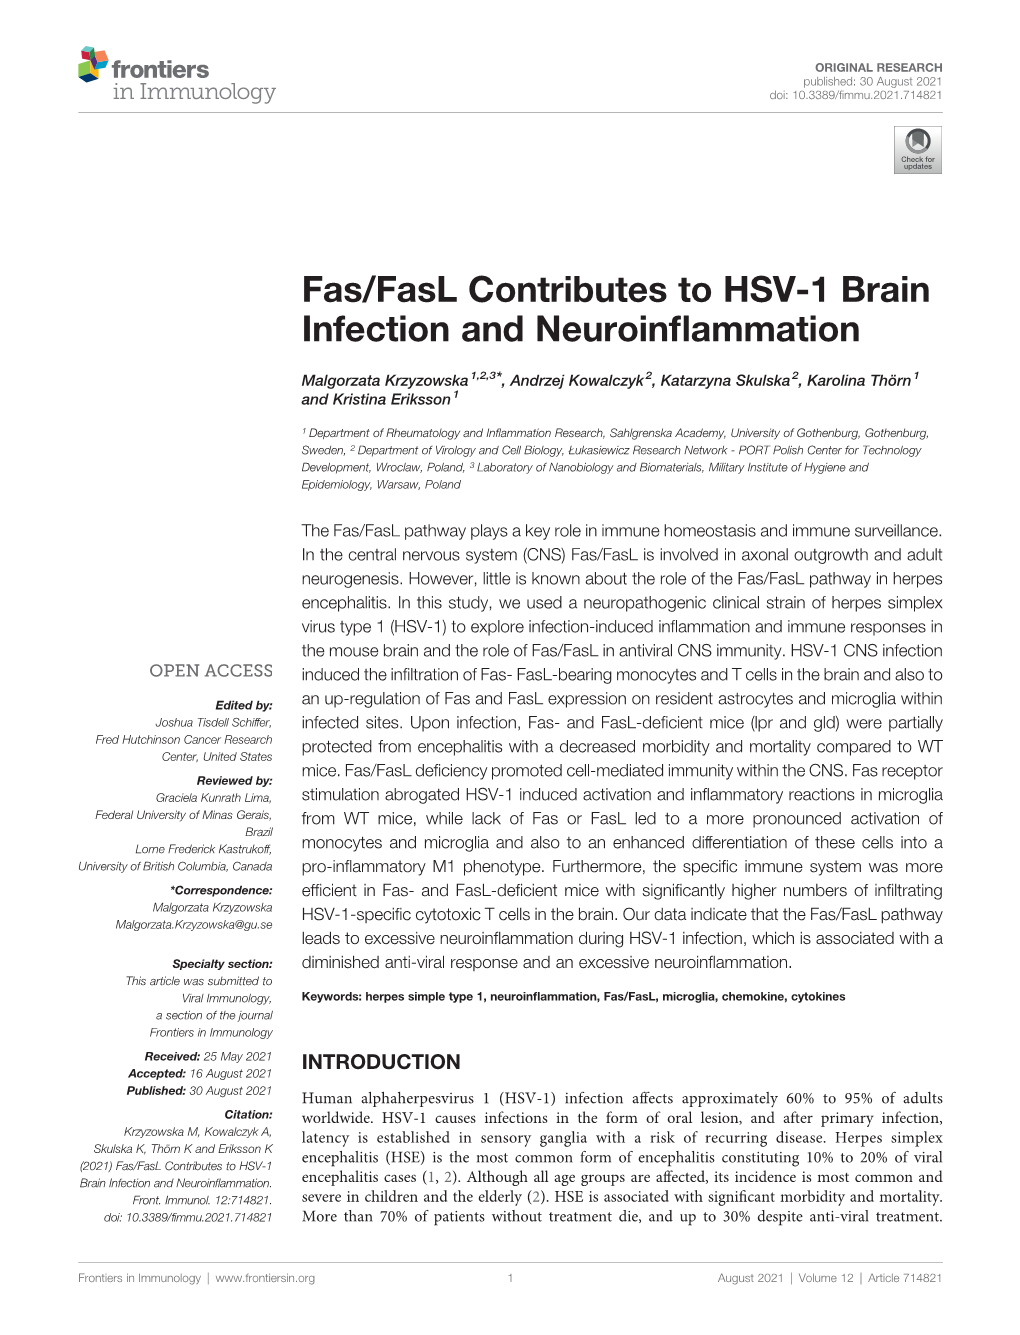 Fas/Fasl Contributes to HSV-1 Brain Infection and Neuroinflammation